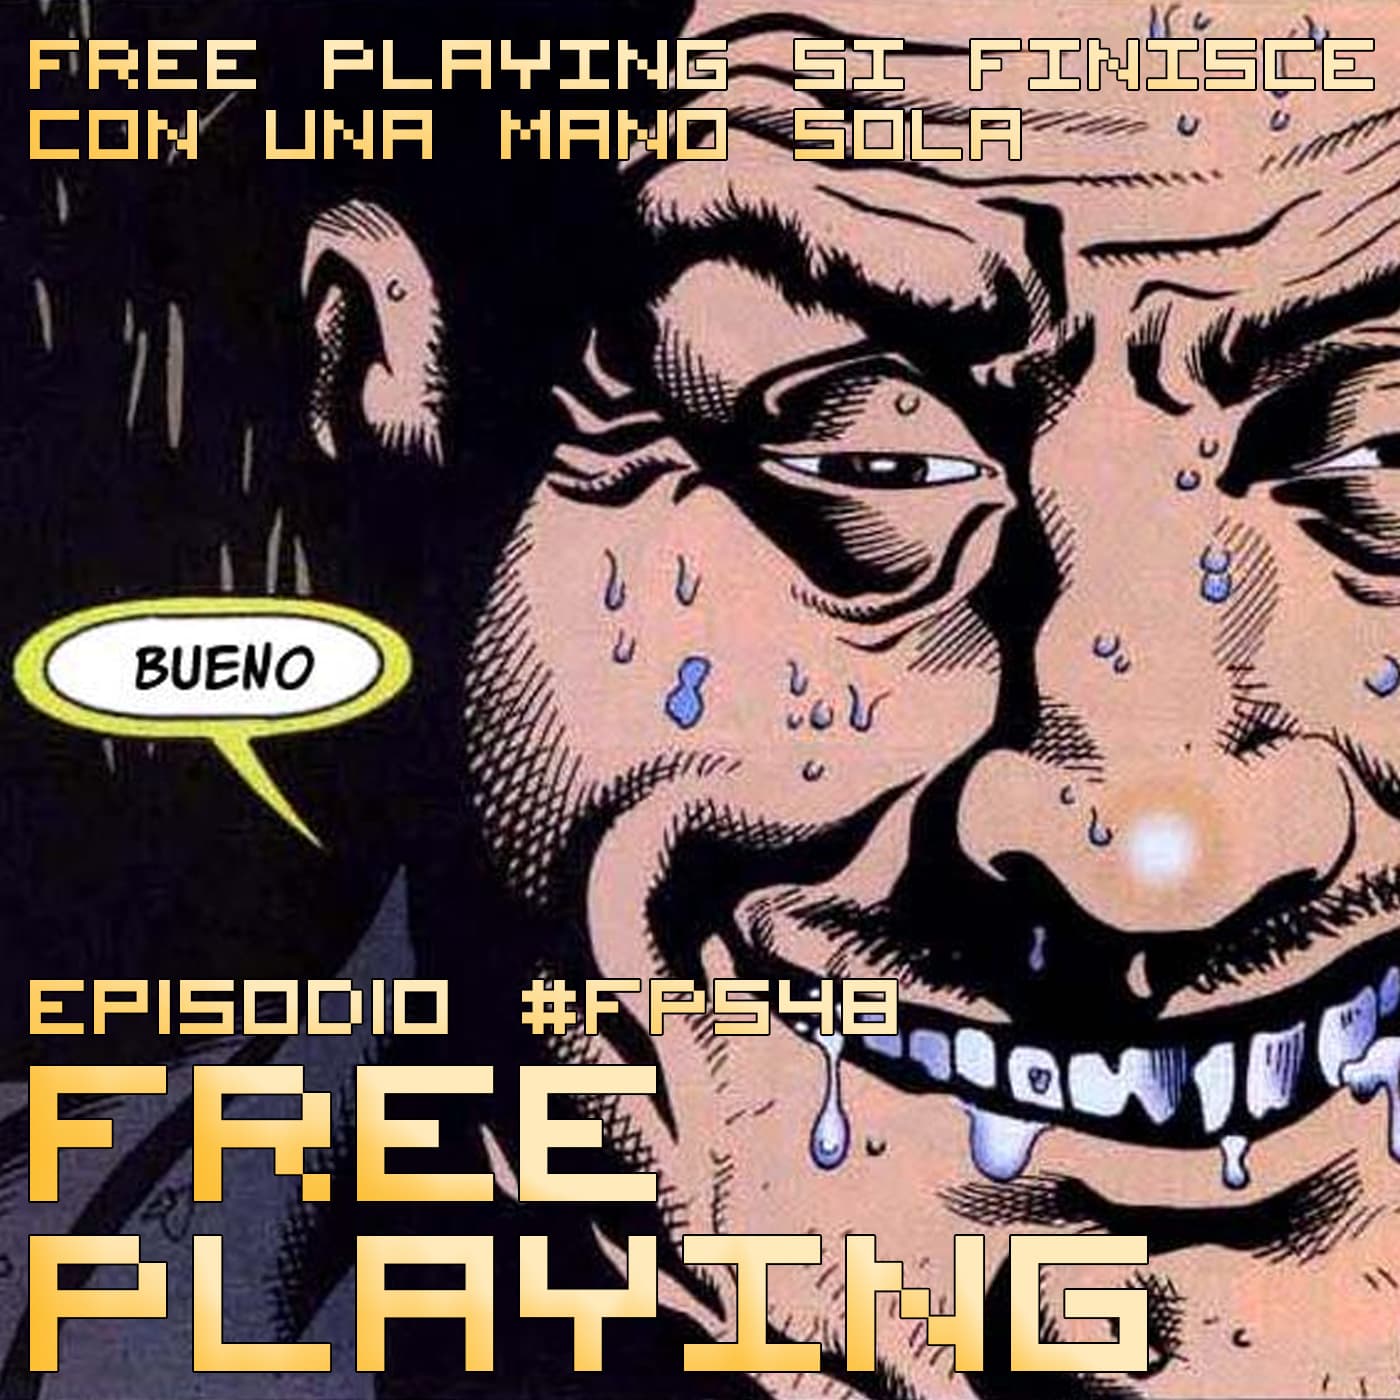 Free Playing #FP548: FREE PLAYING SI FINISCE CON UNA MANO SOLA